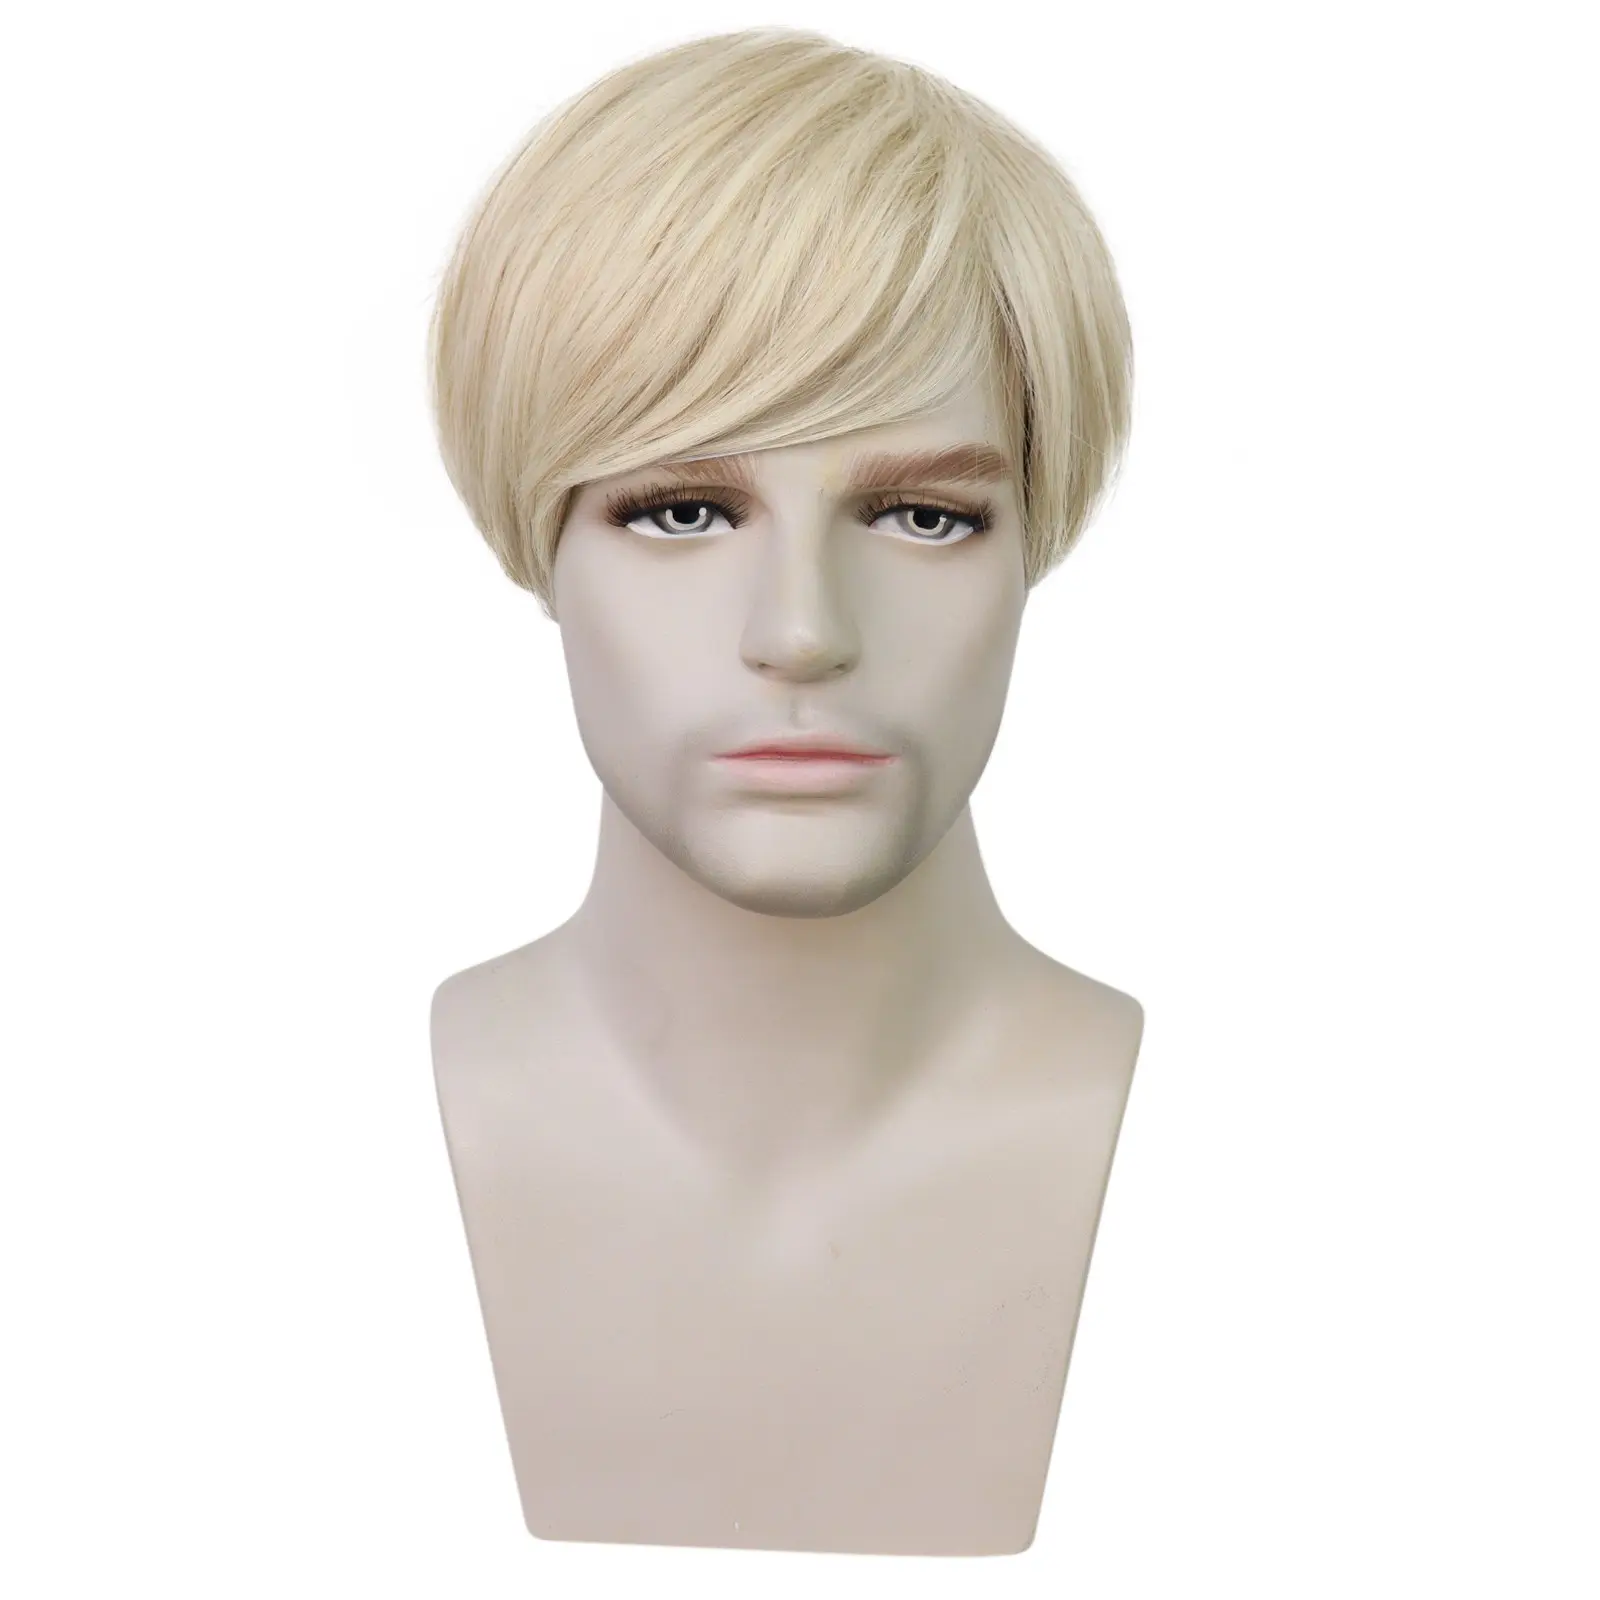 Anogol Short Men Wigs Fashion Hairstyle Blonde Synthetic Full Wigs for Male Daily Wear Heat Resistant